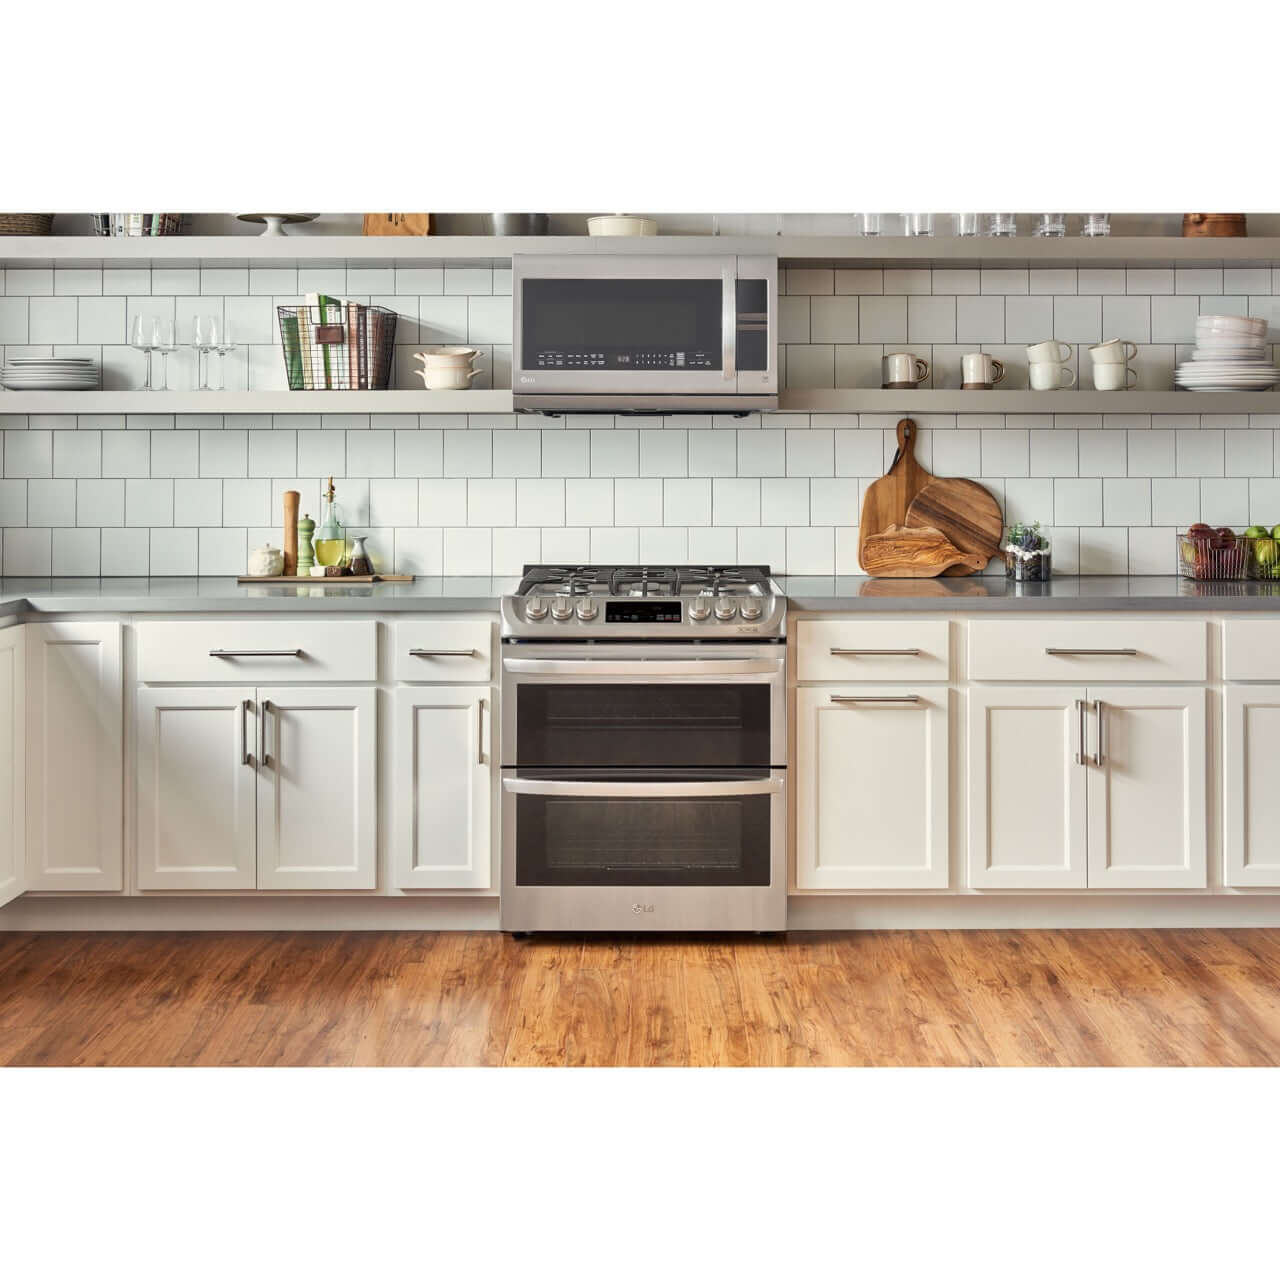 LG 30 in. Gas Slide-In Range with 6.9-Cu. Ft. Double Oven and ProBake Convection, Stainless Steel (LTG4715ST)